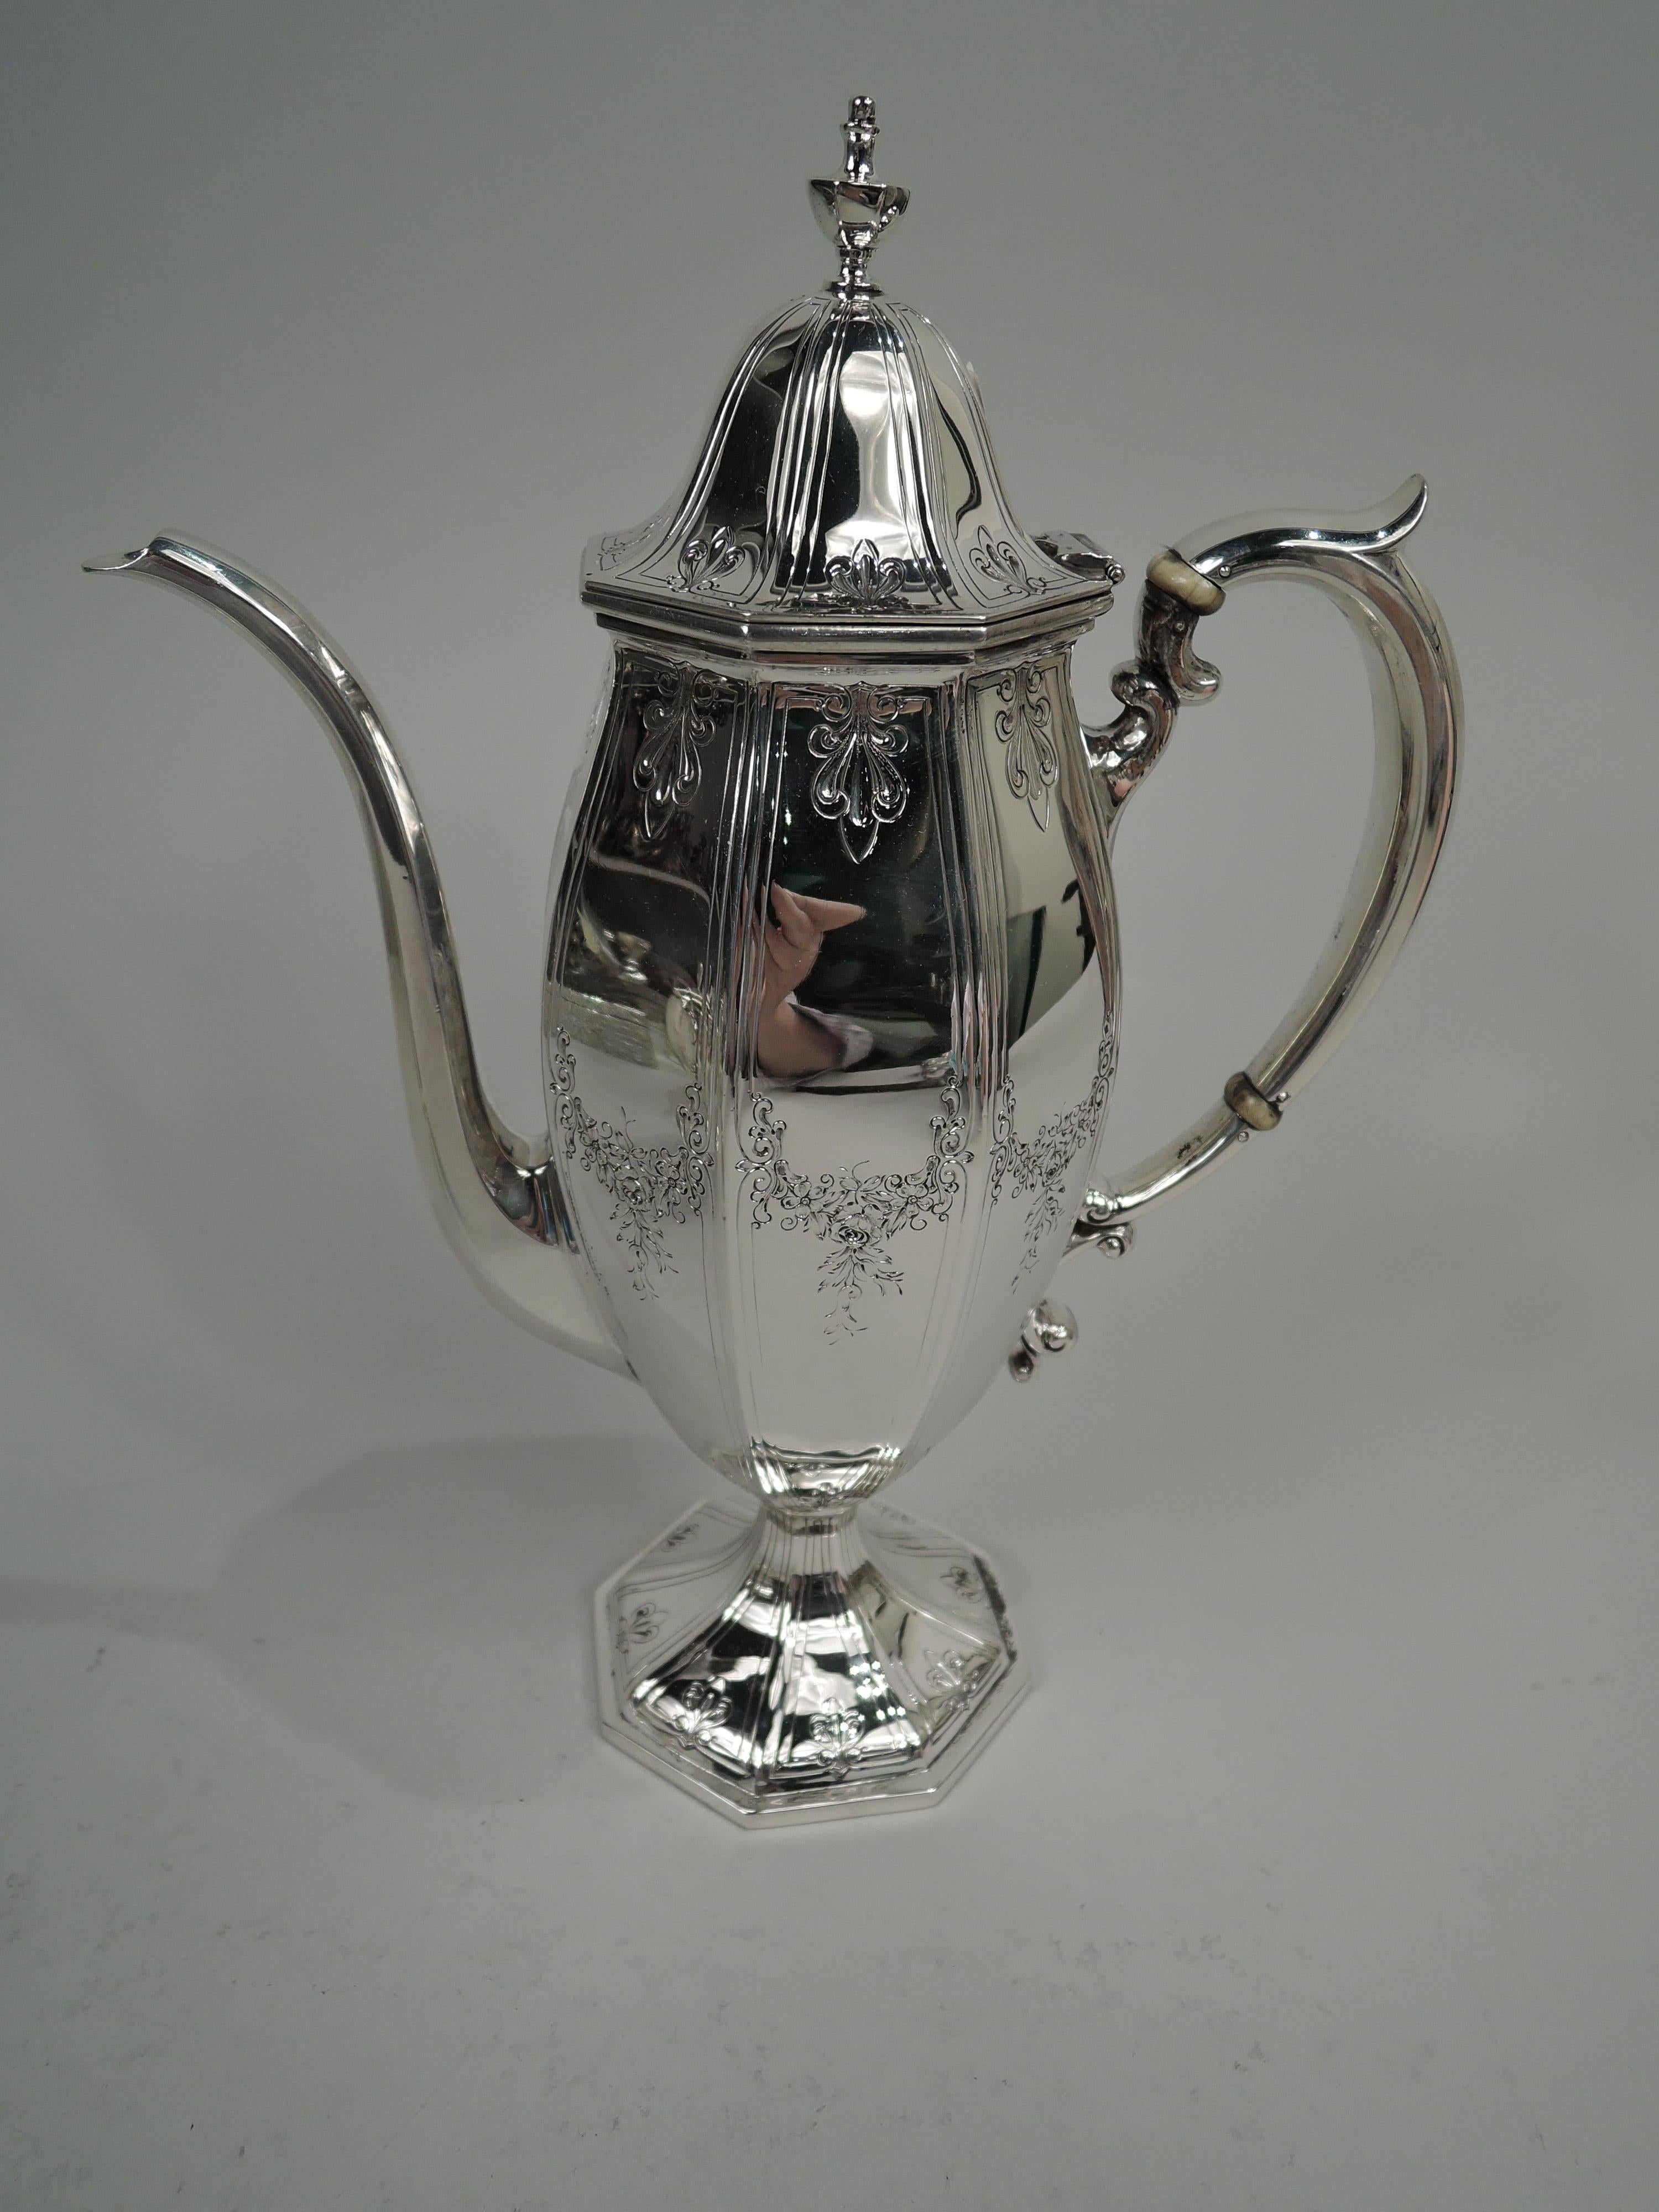 Edwardian Regency sterling silver 3-piece coffee set, ca 1910. This set comprise coffeepot, creamer, and sugar. Coffeepot and creamer have ovoid body. Sugar has round body. All faceted with raised foot and capped double-scroll handles. Coffeepot